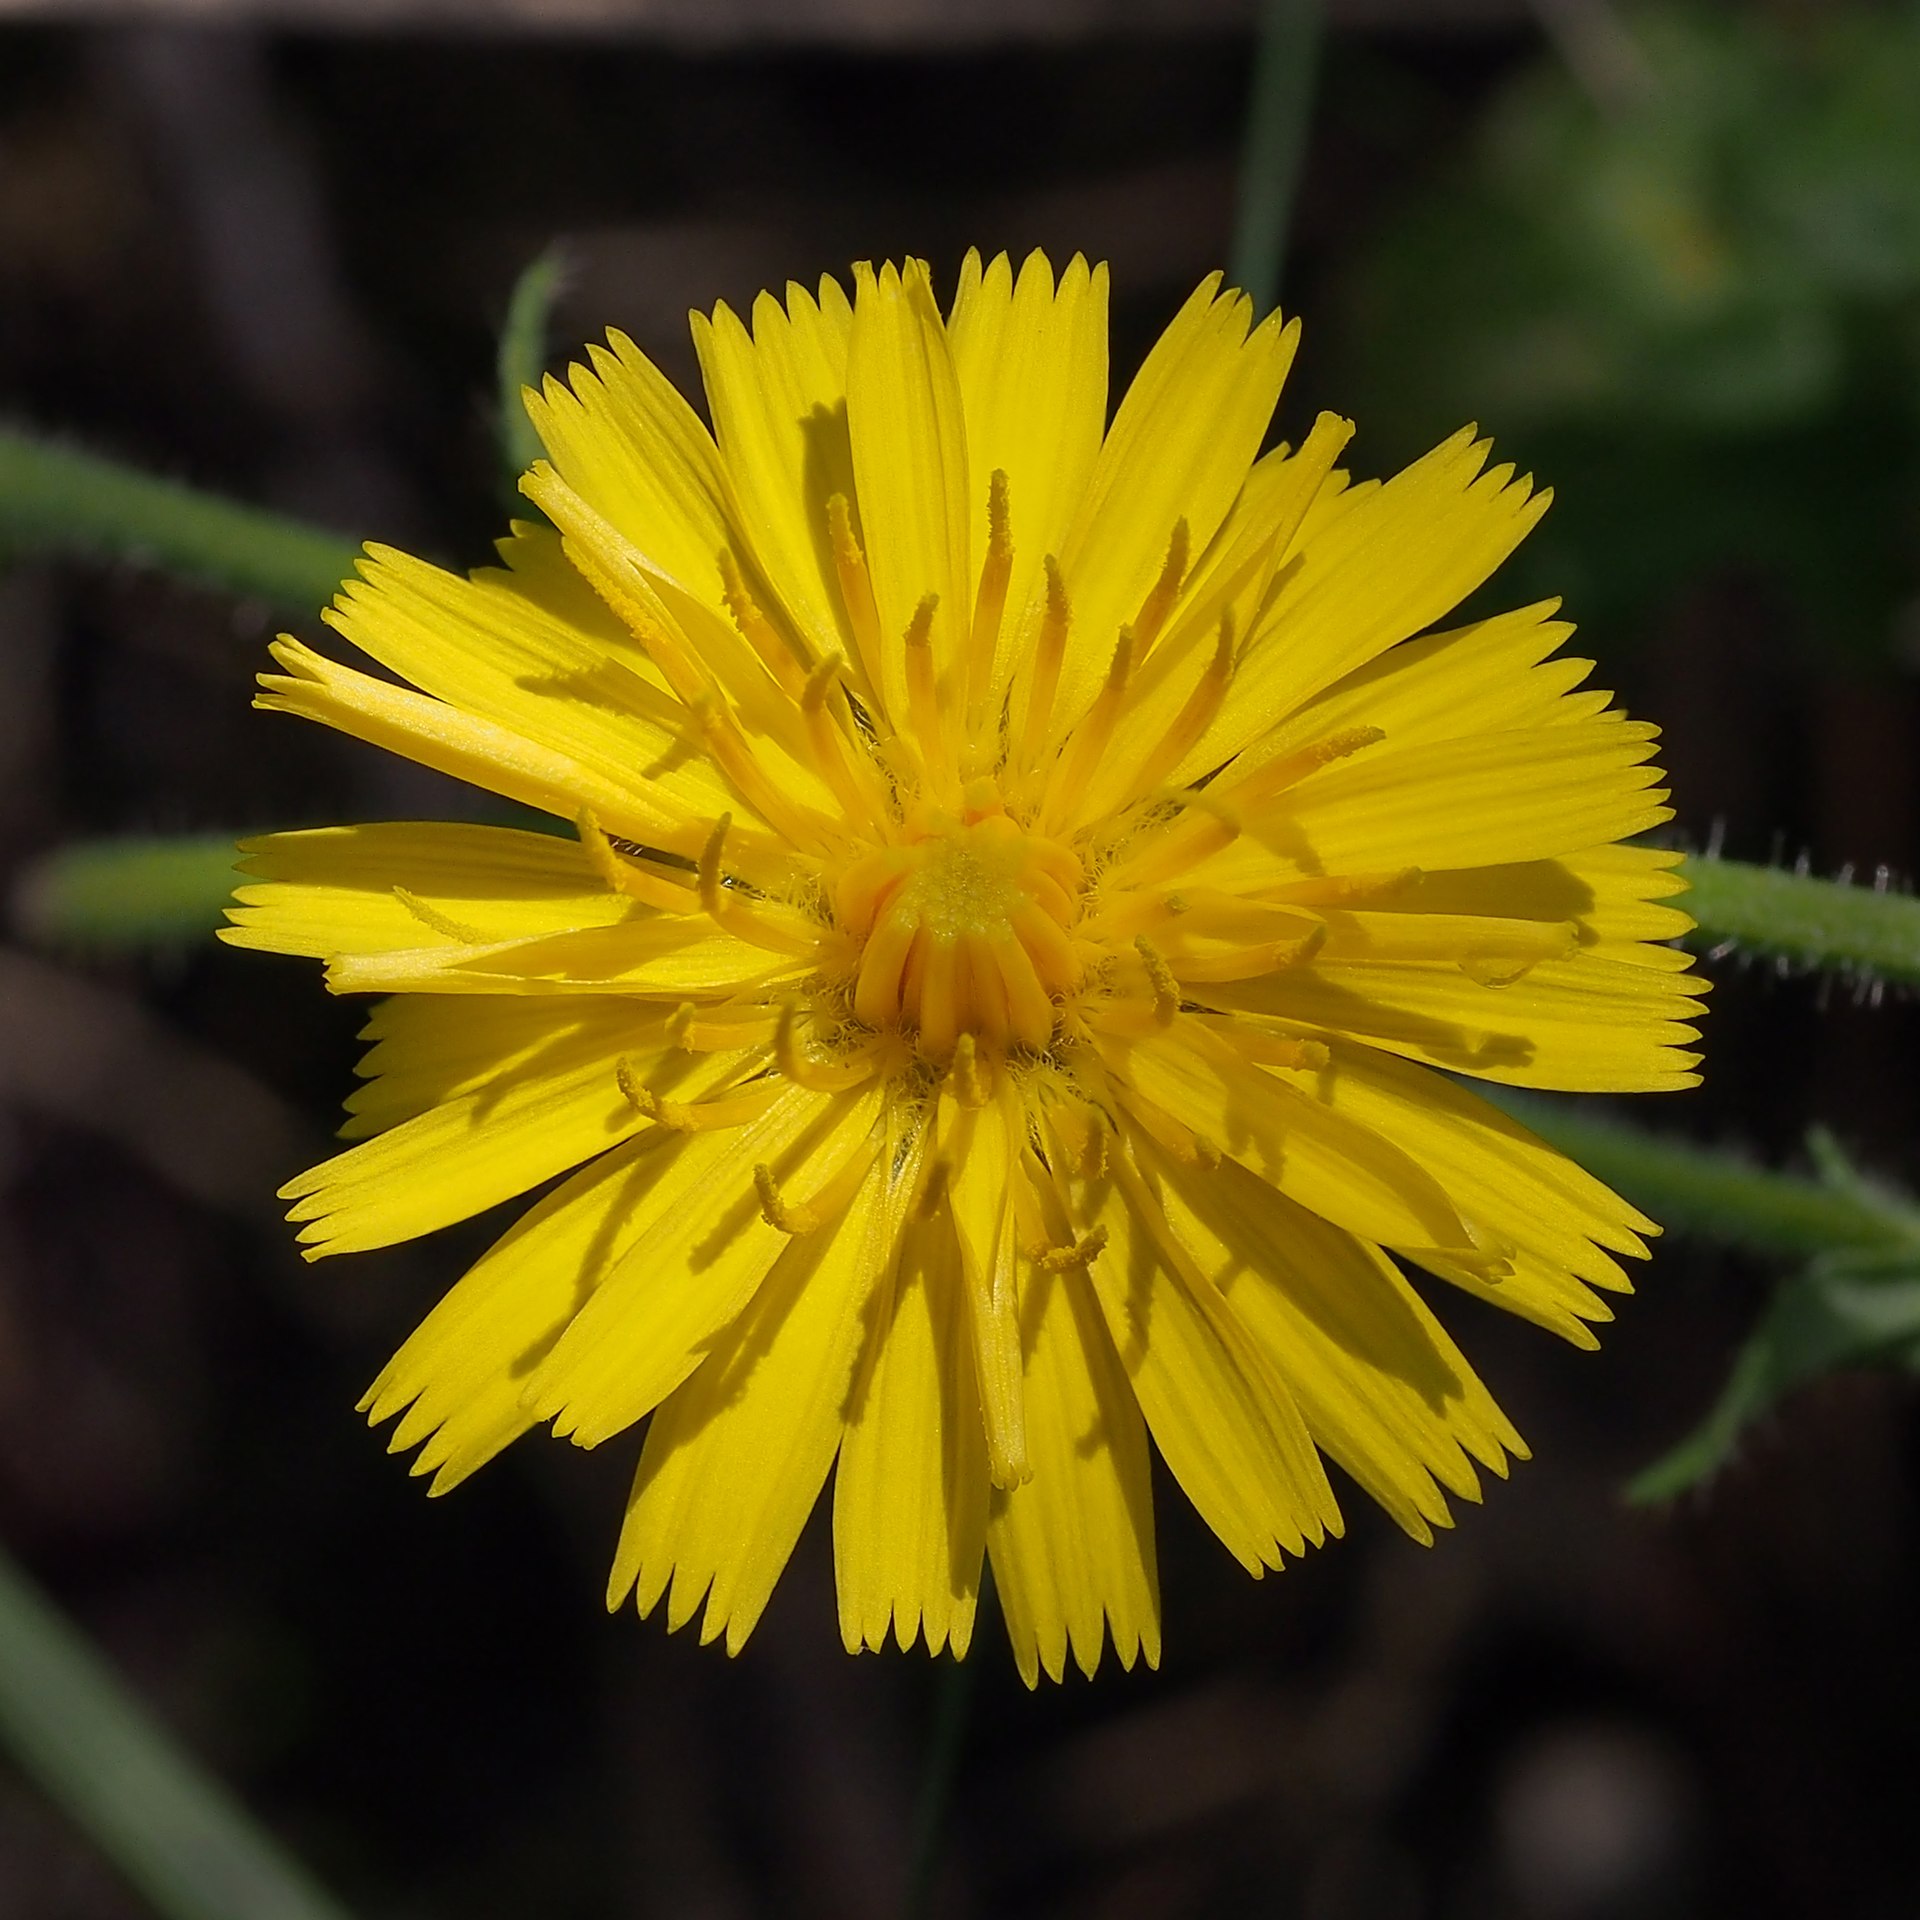 A close up of a yellow flower, with thin and long petals that end in several indents at their edges